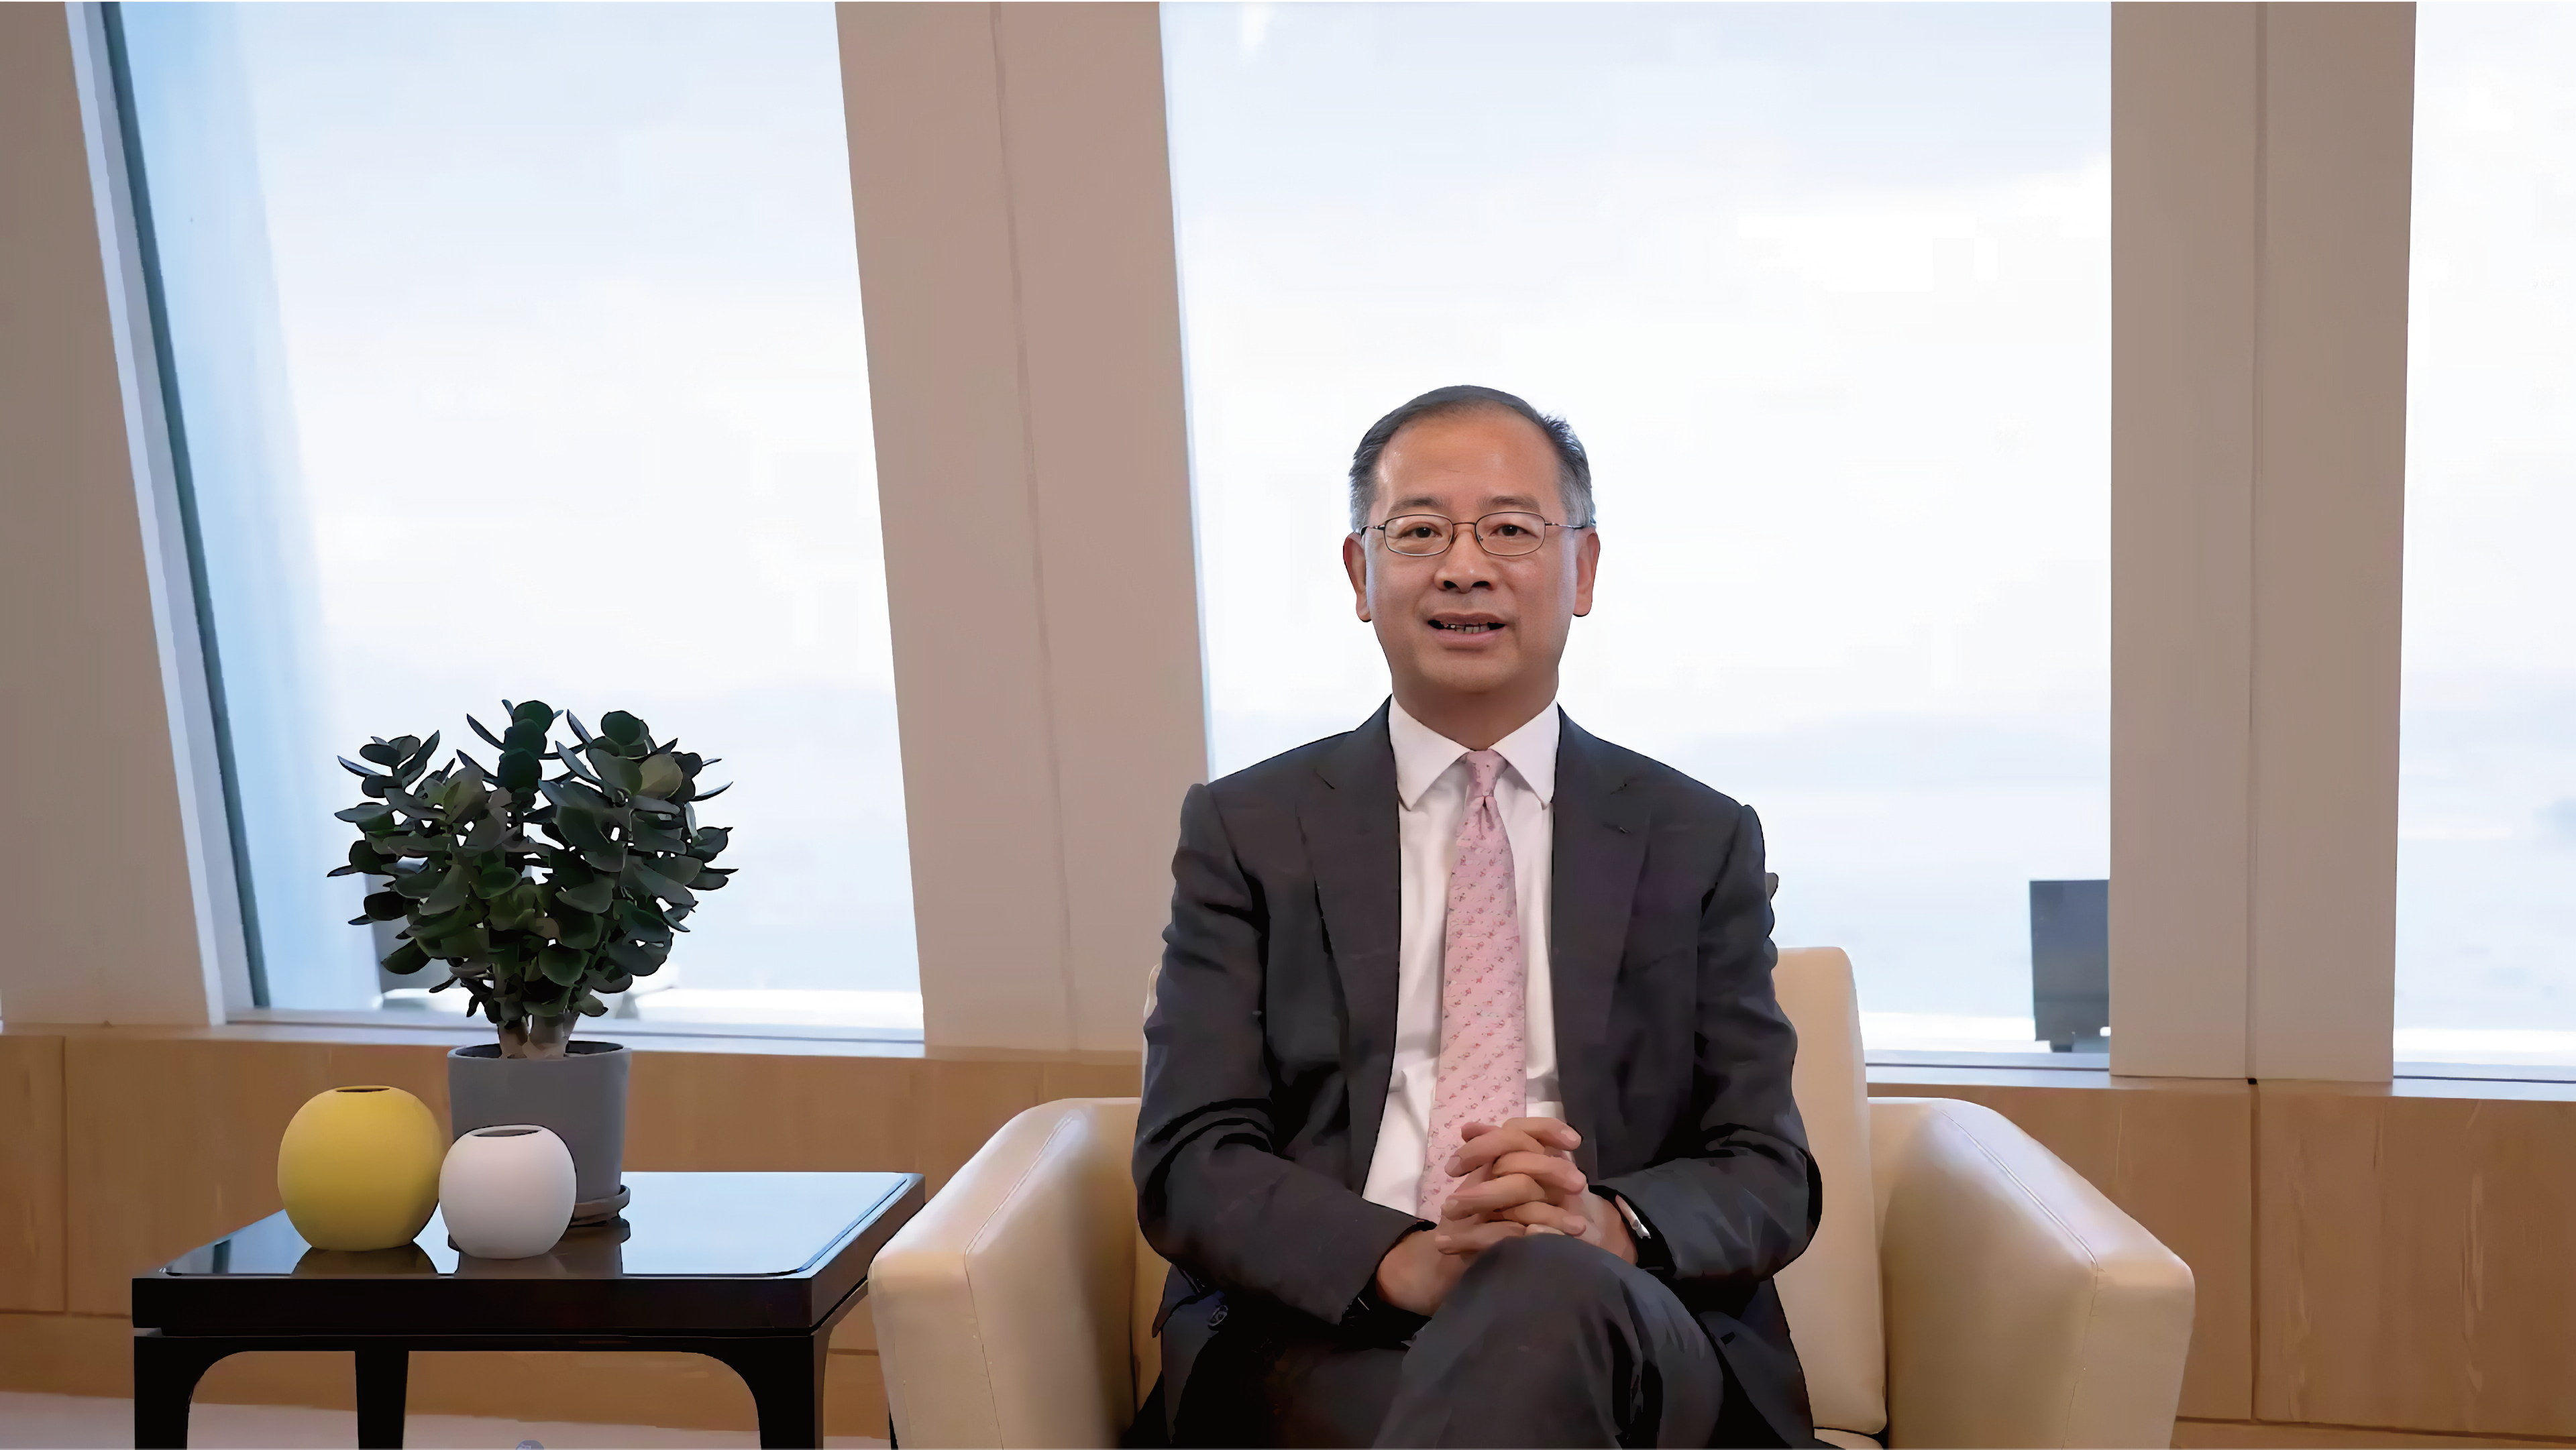 The Chief Executive of the Hong Kong Monetary Authority and the Honorary President of the Treasury Markets Association Council, Mr Eddie Yue, gives the welcoming remarks and keynote speech virtually at the Treasury Markets Summit 2022 held in Hong Kong.